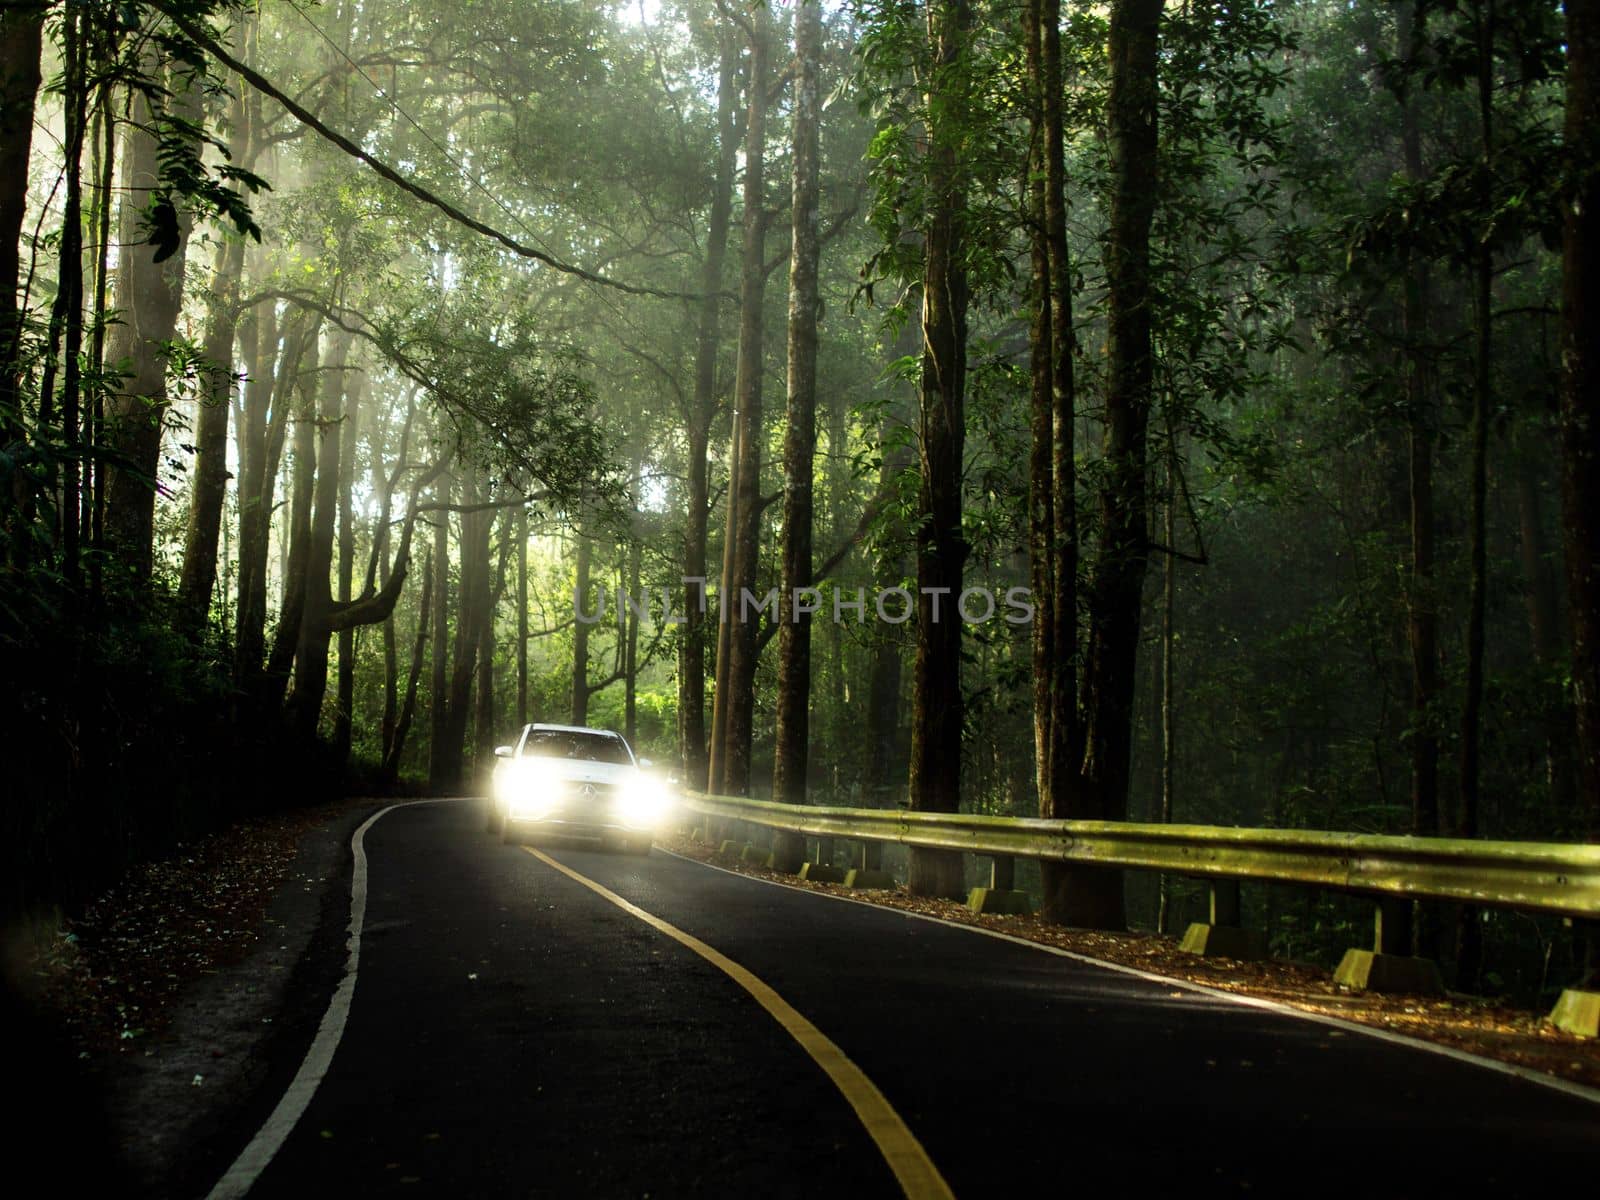 Mercedes on a beautiful road by Alexzhilkin